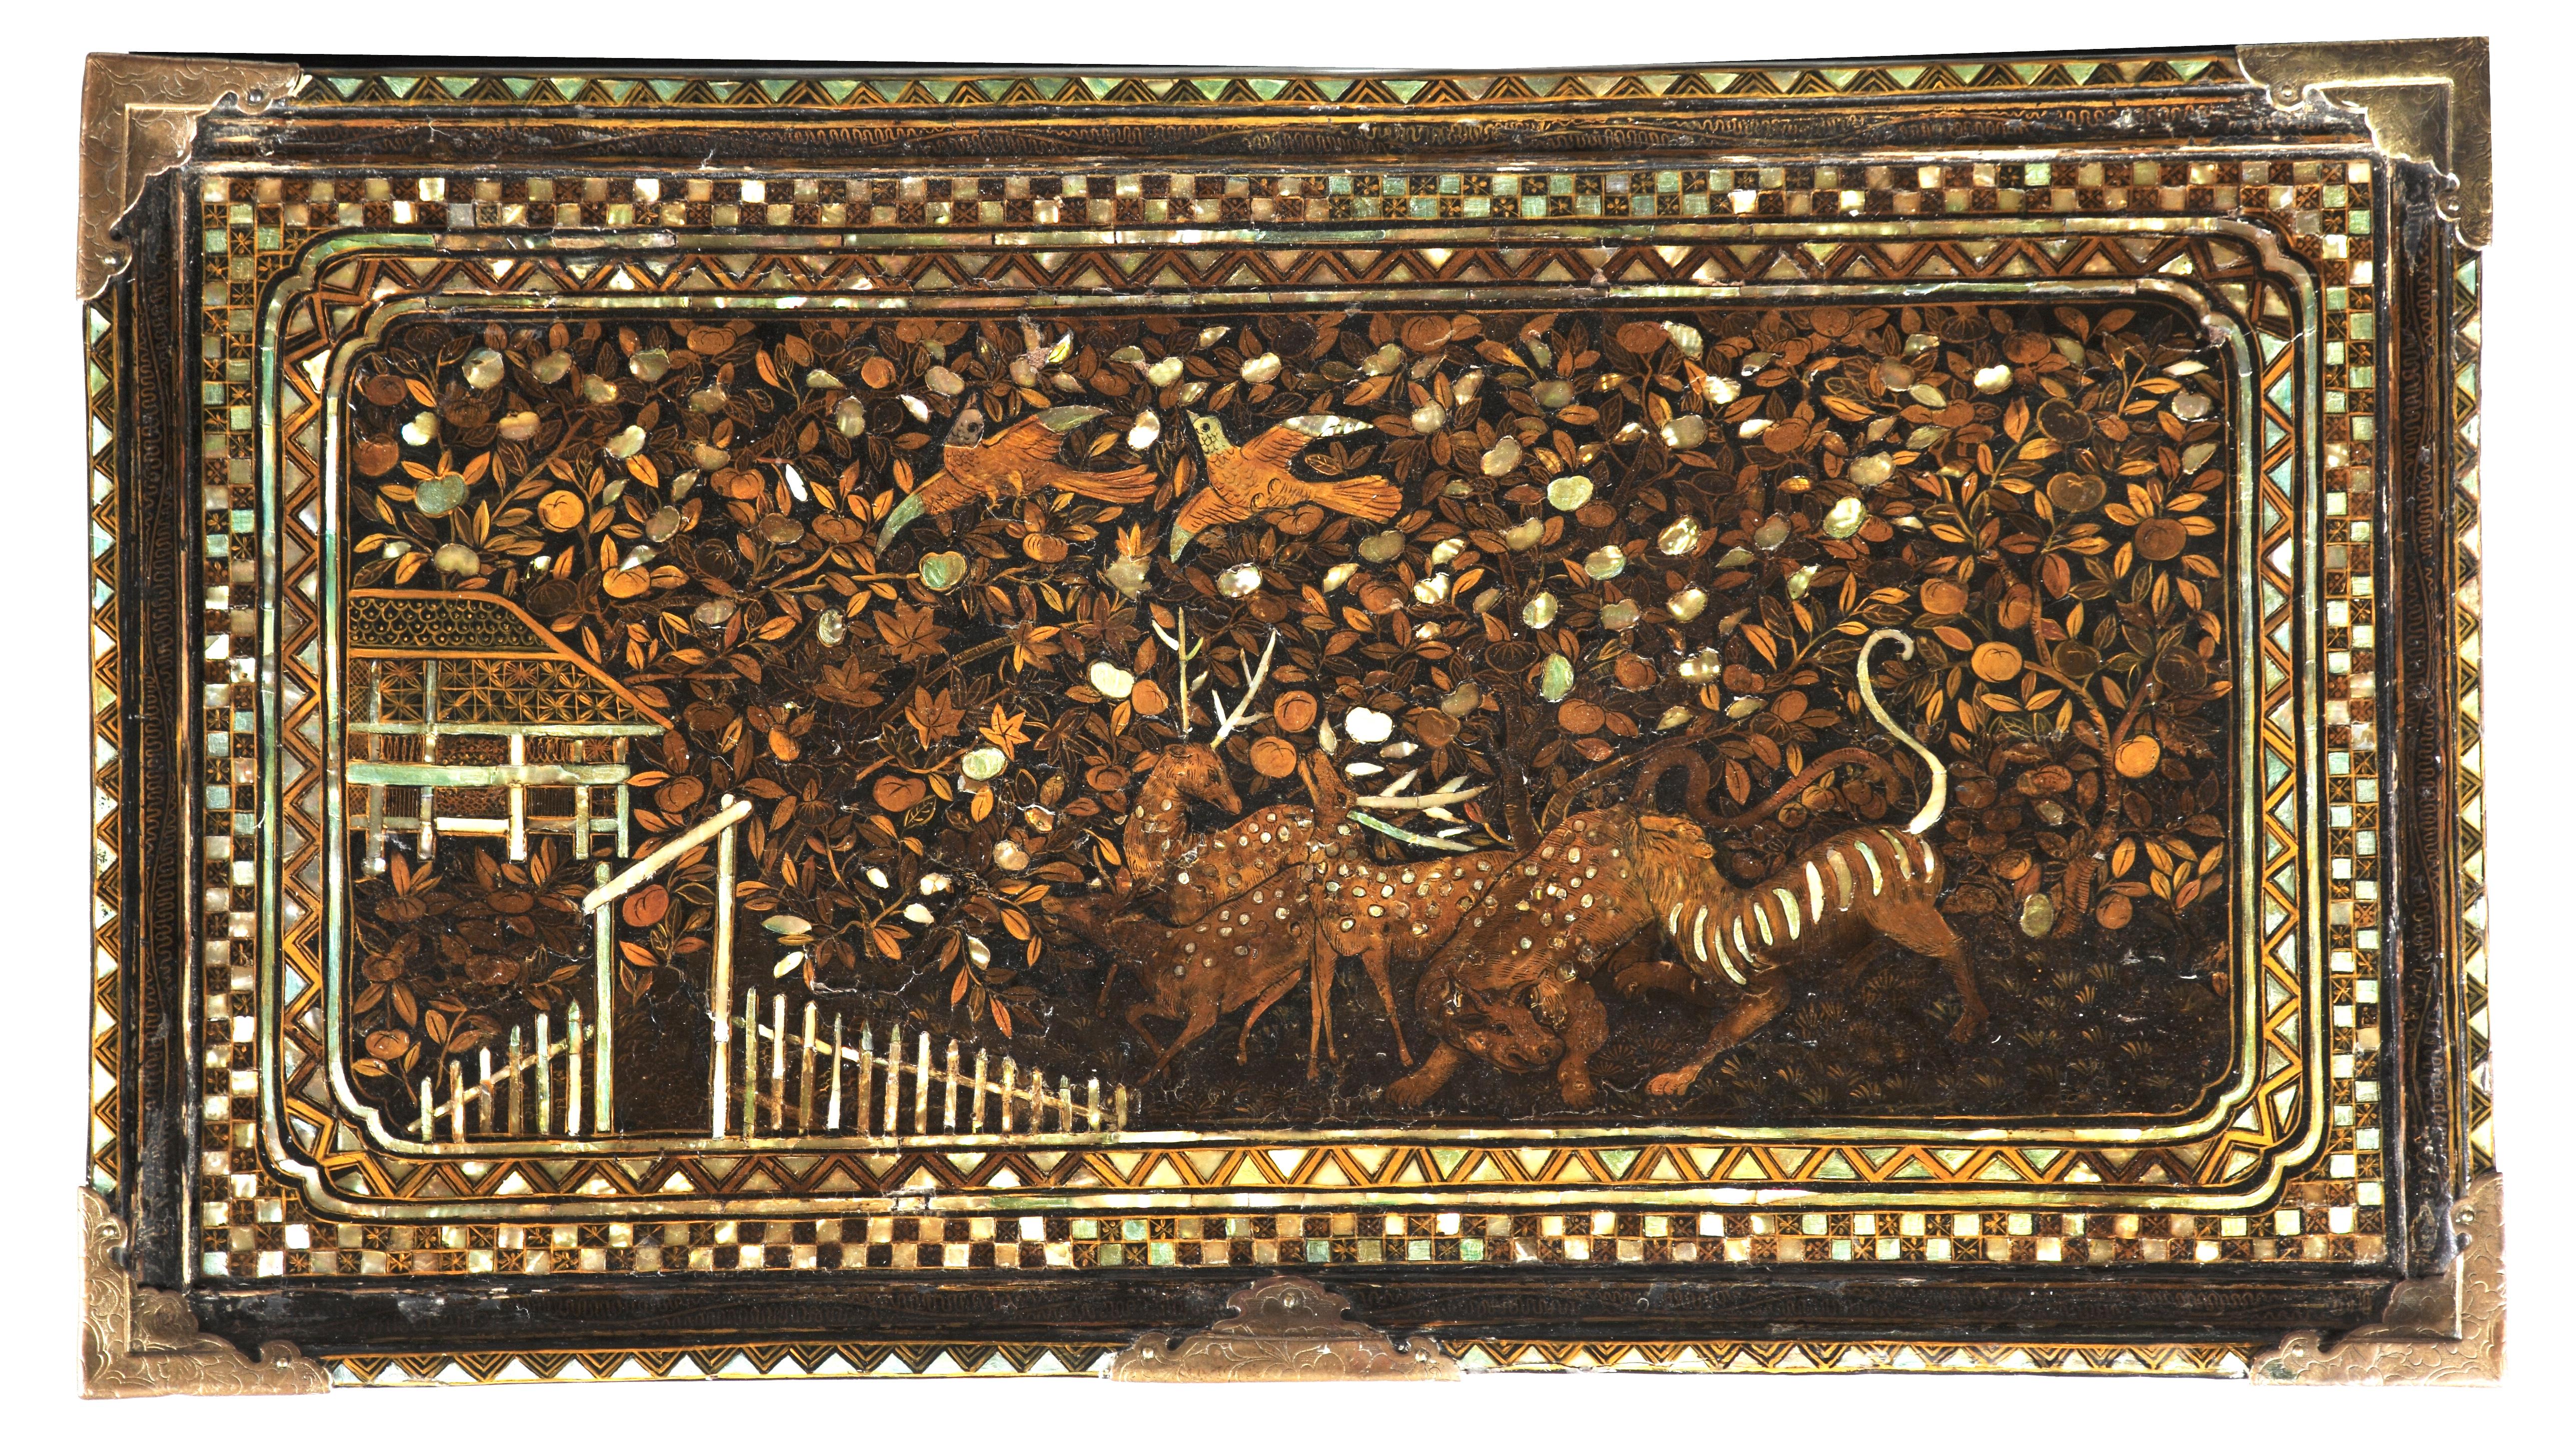 A Portuguese-colonial Japanese Namban lacquer vargueno cabinet

Momoyama period, circa 1600

 H. 43 x W. 64.5 x D. 36 cm

Wood, black lacquered and decorated with gold and inlays of mother-of-pearl, brass mounts and carrying handles, the fall front